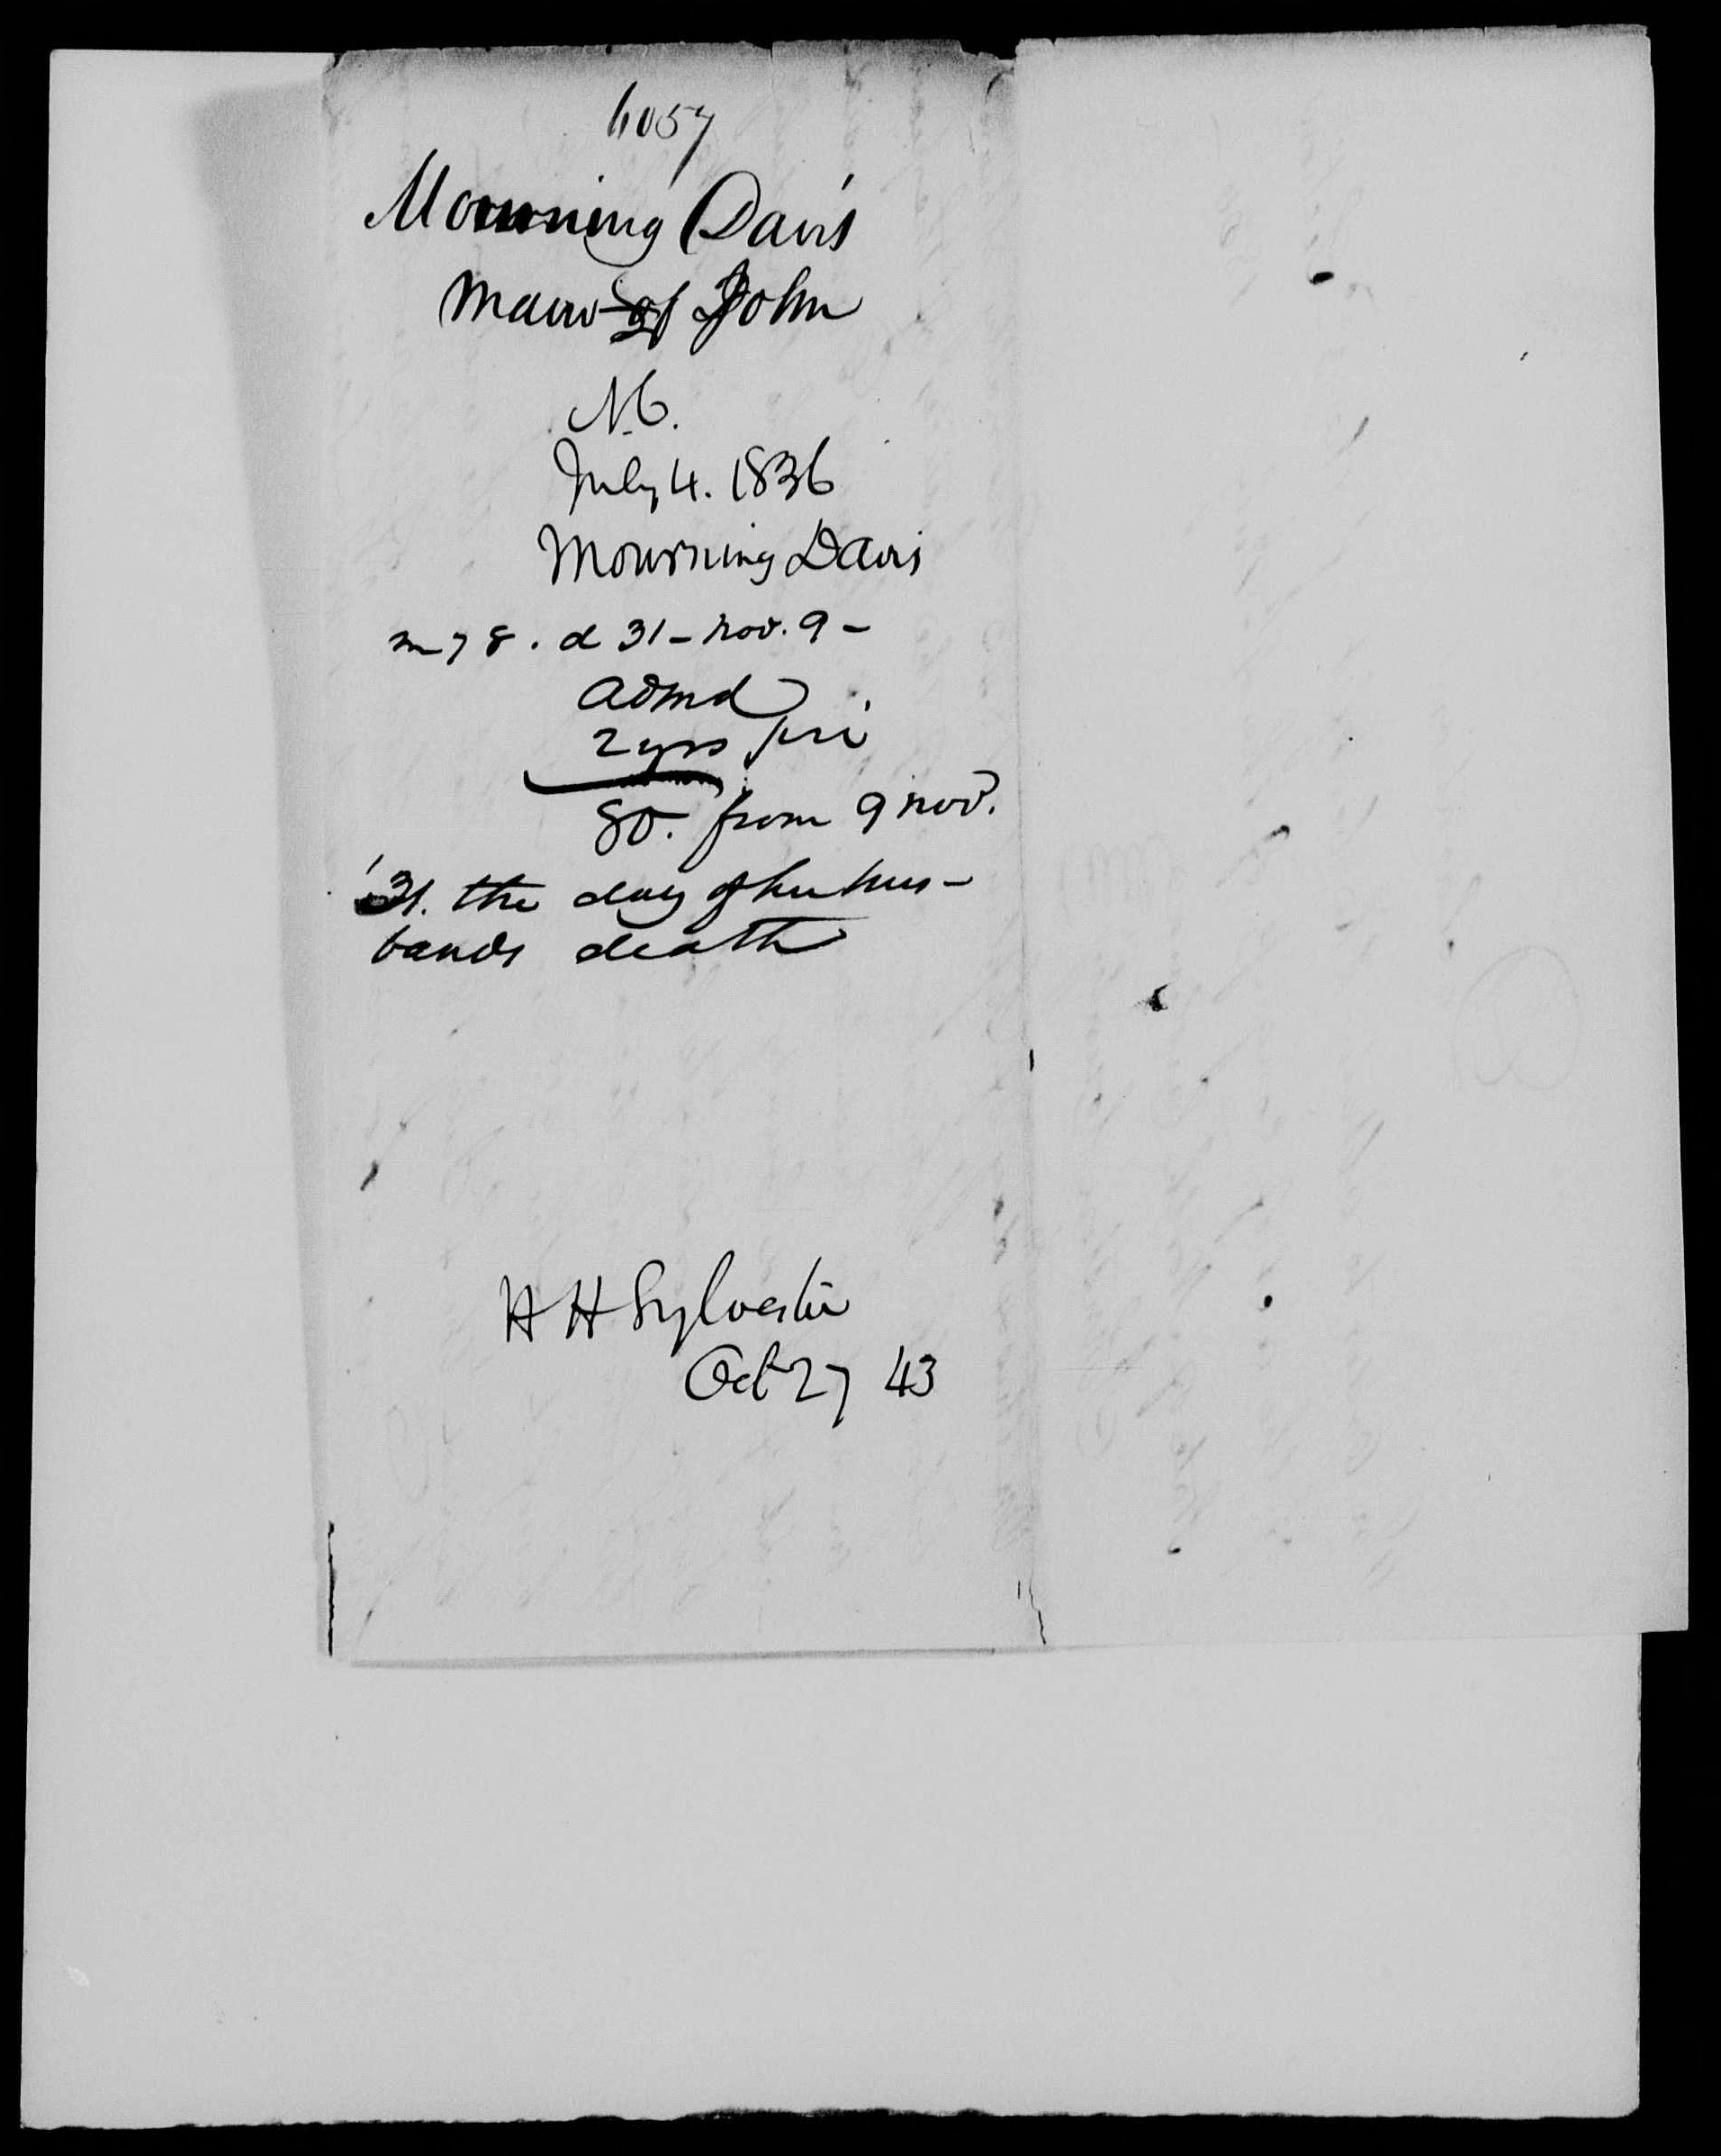 Application for a Widow's Pension from Mourning Davis, 4 September 1843, page 3